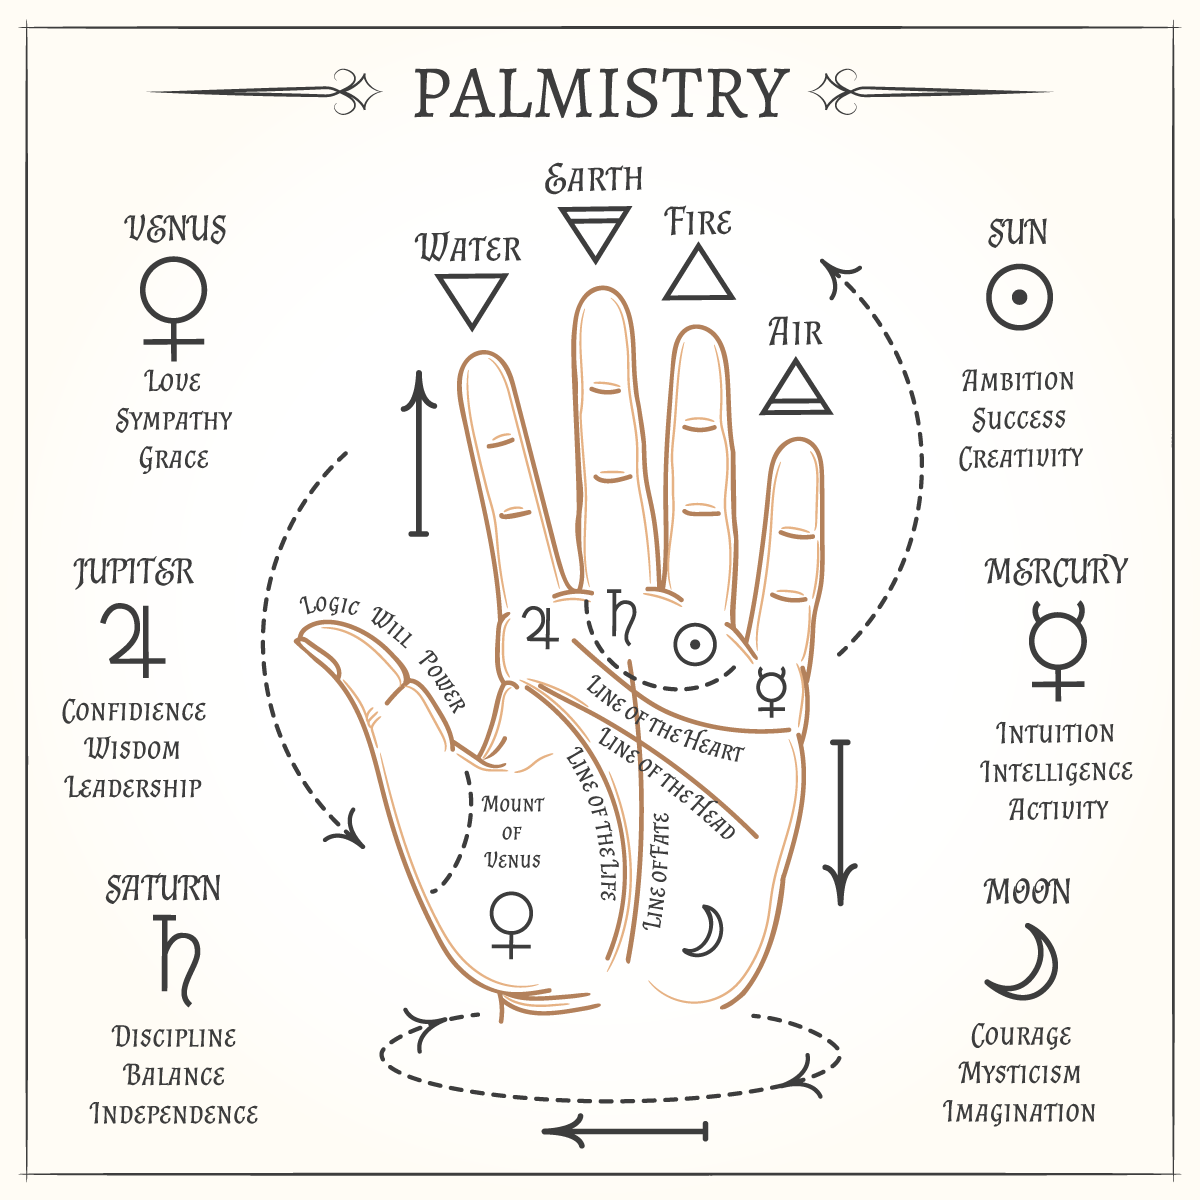 Palm Reading will give you details on many areas of your life in the present, a glimpse into the past, and a peek into the future. Find out about love and relationships, career, money, and health.